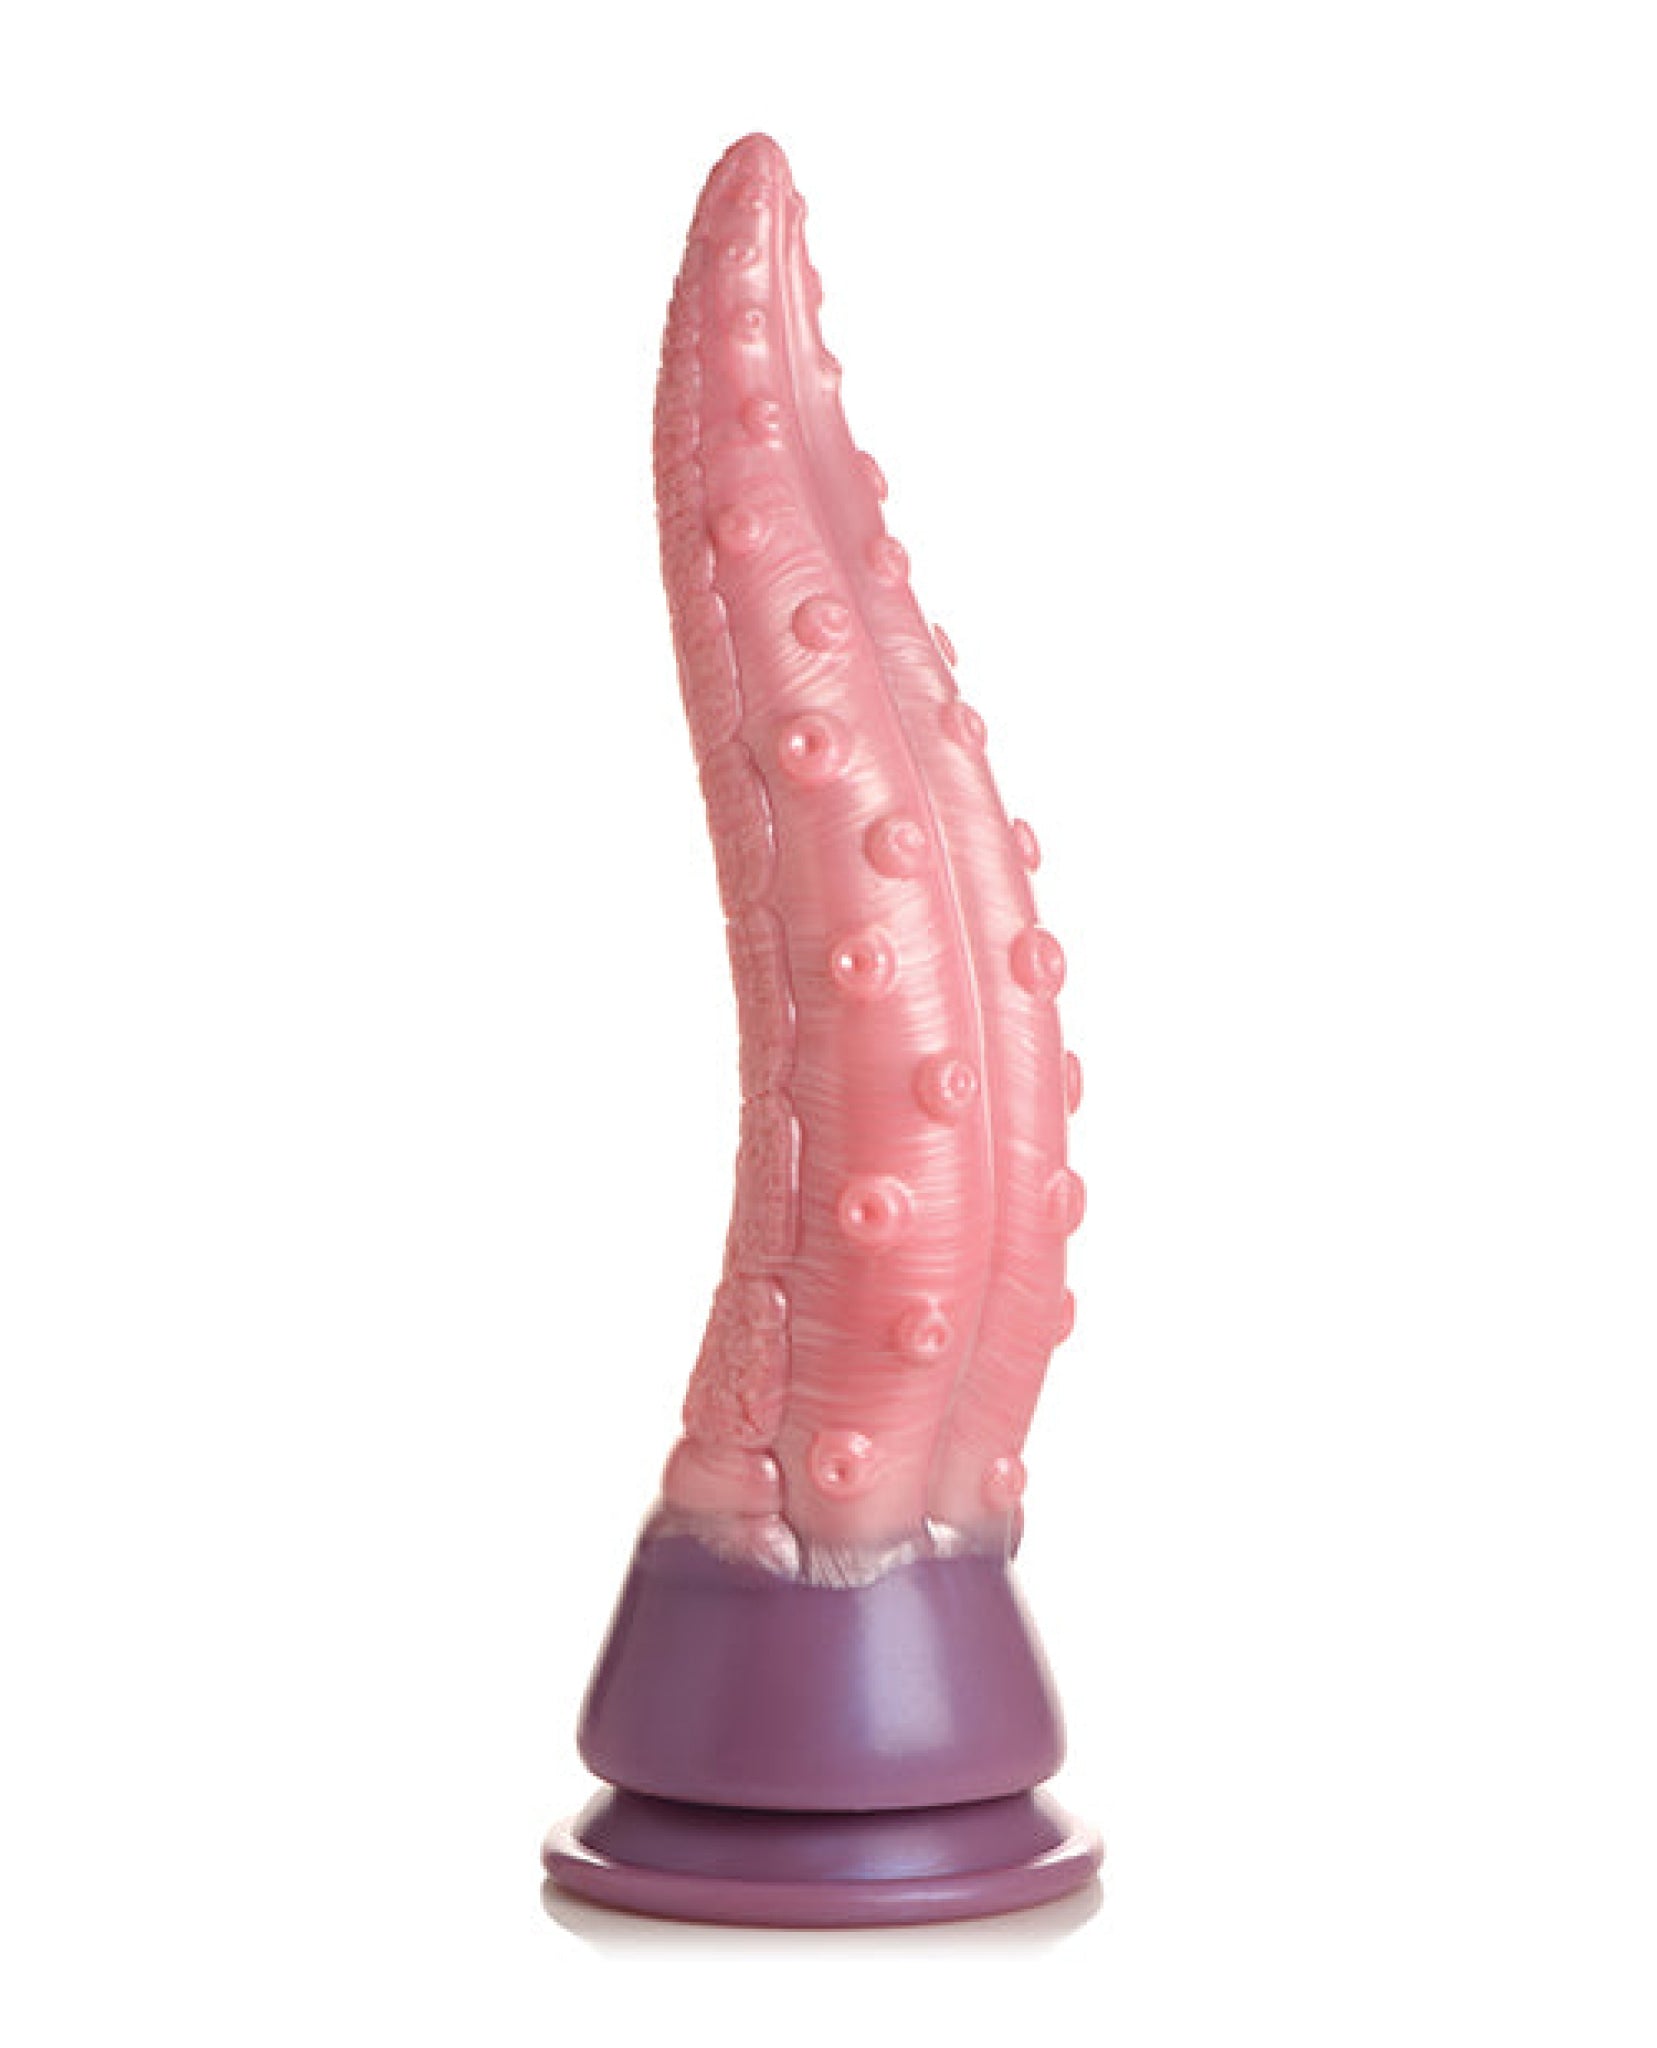 Creature Cocks Octoprobe Tentacle Silicone Dildo - Pink/Purple Xr LLC